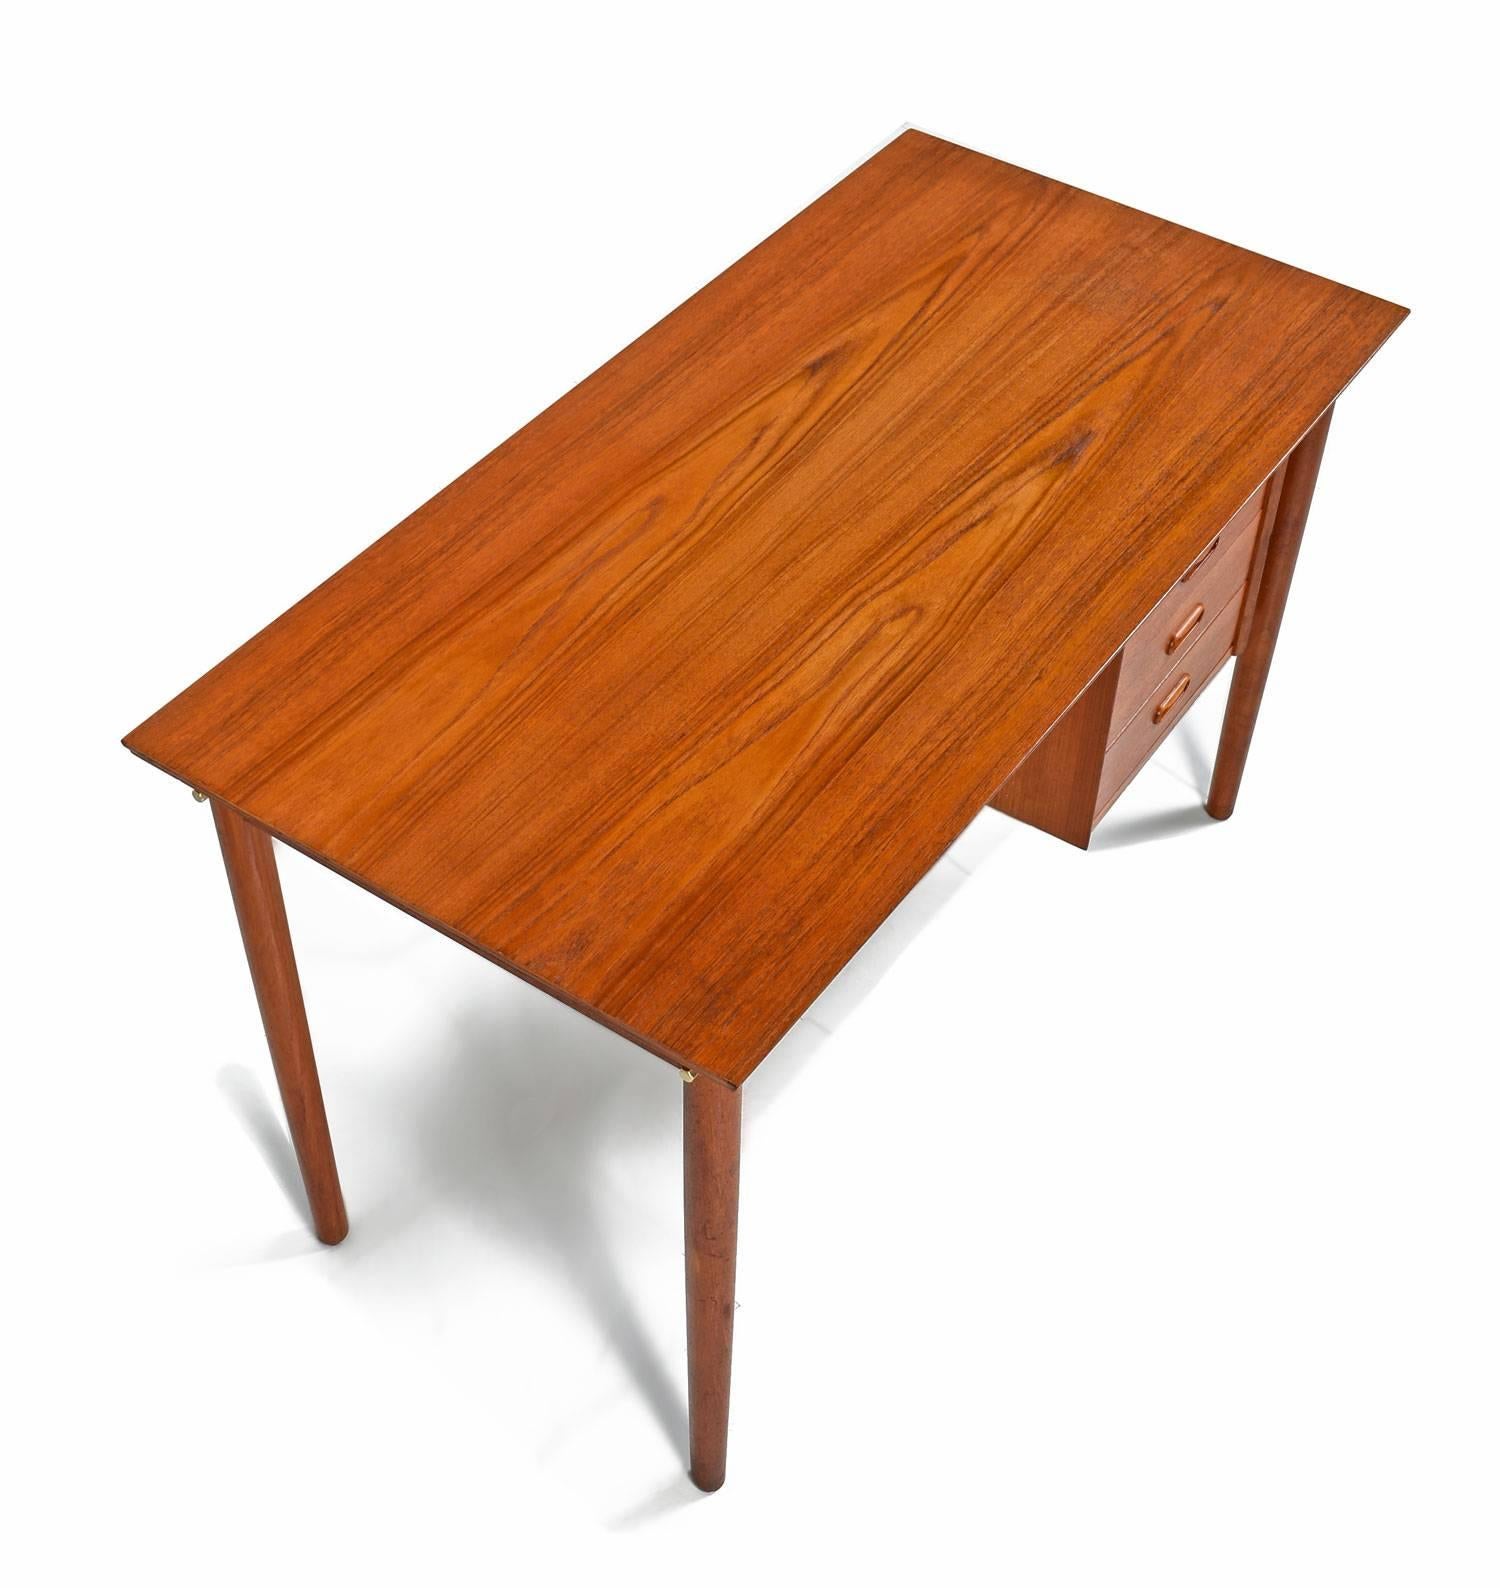 Mid-Century Modern Danish teak desk by Arne Vodder. This vintage desk exhibits clever Scandinavian design with an adjustable column of drawers. Slide the stack of drawers to the left or right side of the desk to suite your comfort. The Minimalist